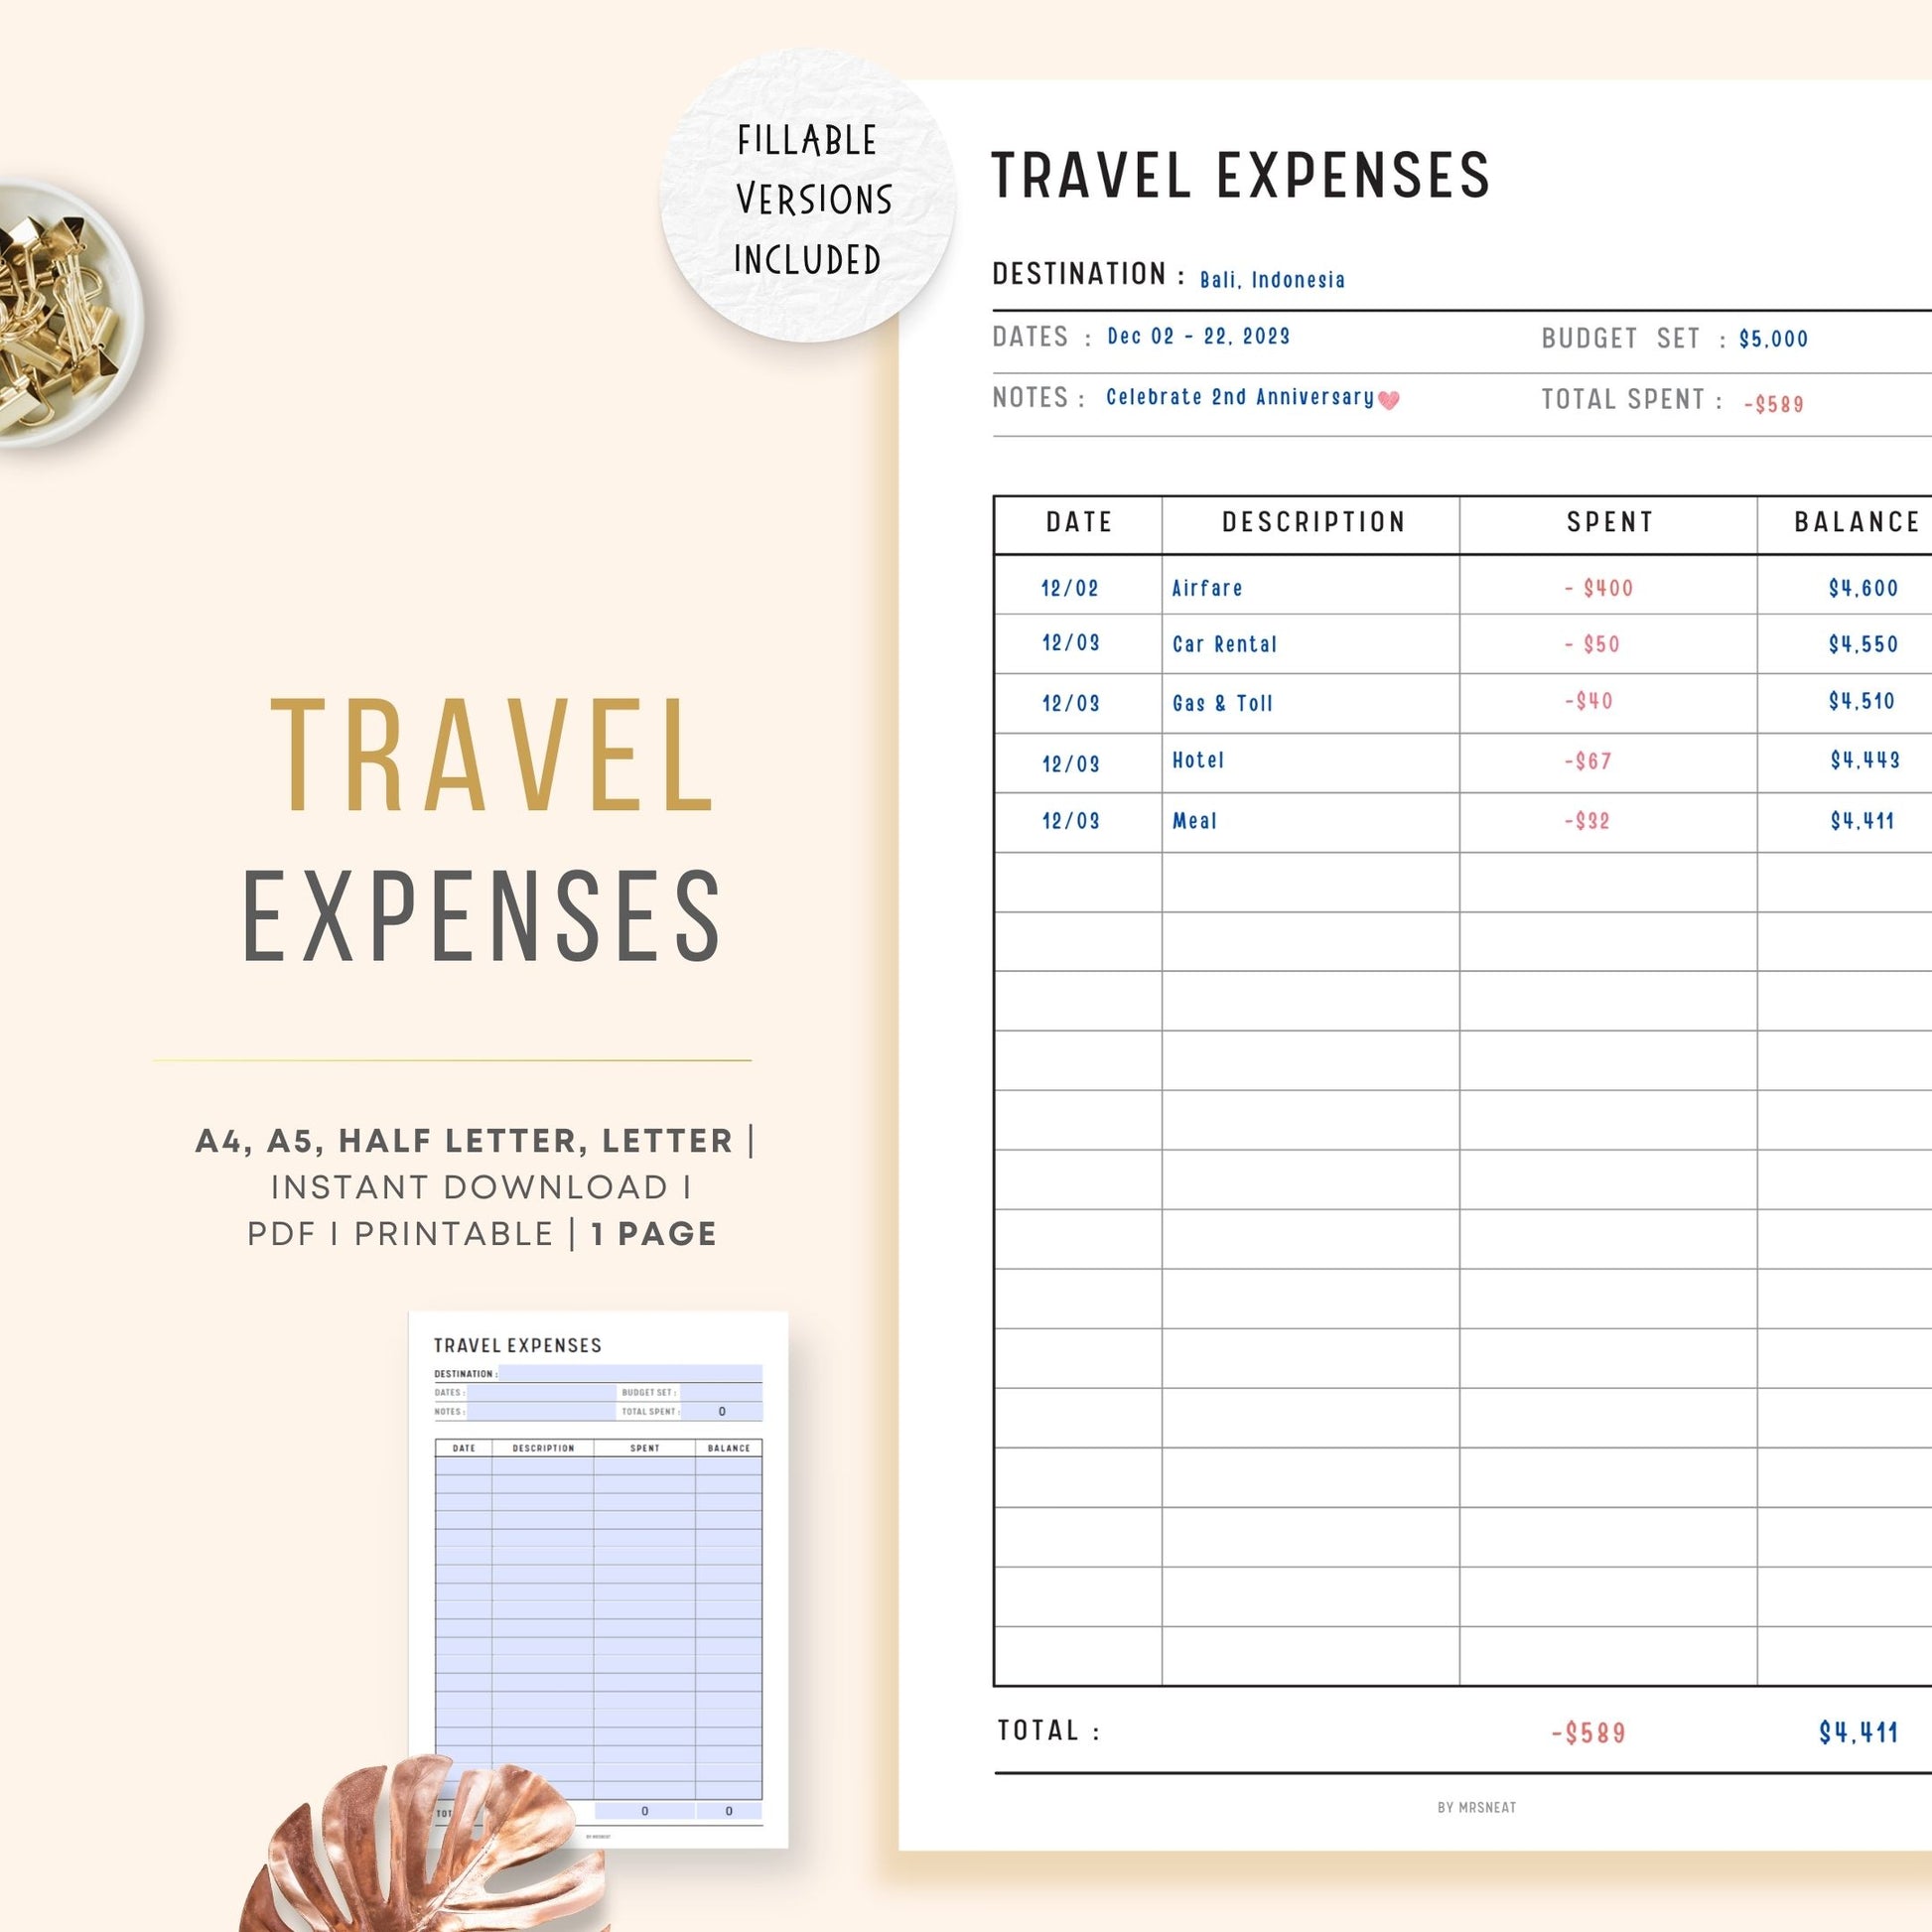 Travel Expenses Tracker Template Printable, A4, A5, Letter, Half Letter, Fillable version included